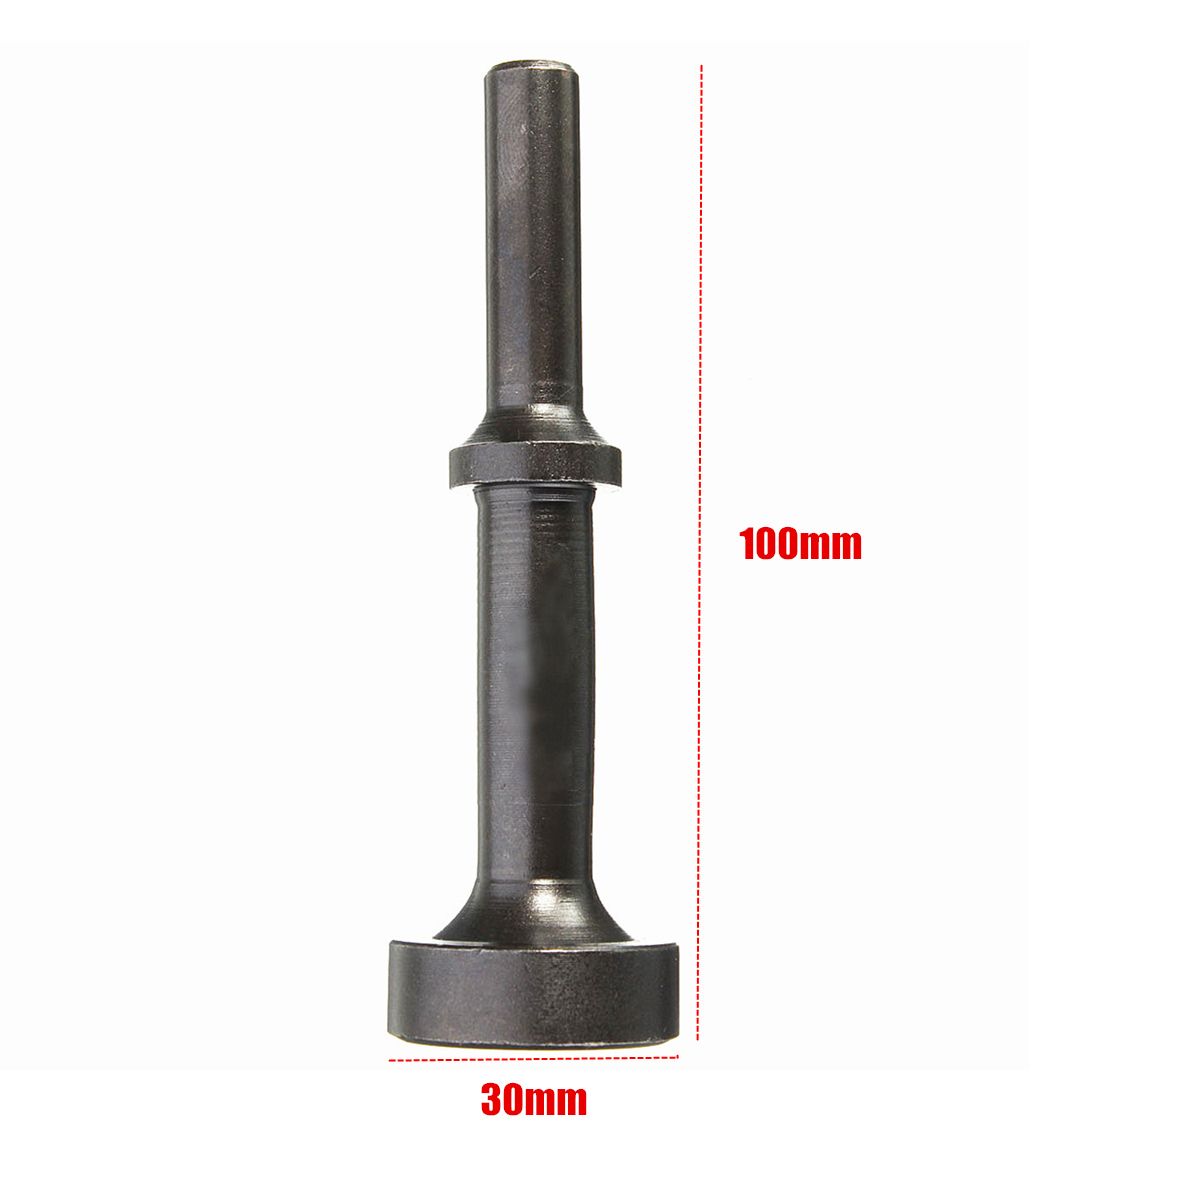 80mm100mm-Smoothing-Pneumatic-Drifts-Air-Hammers-Bit-Set-Extended-Length-Tool-1272253